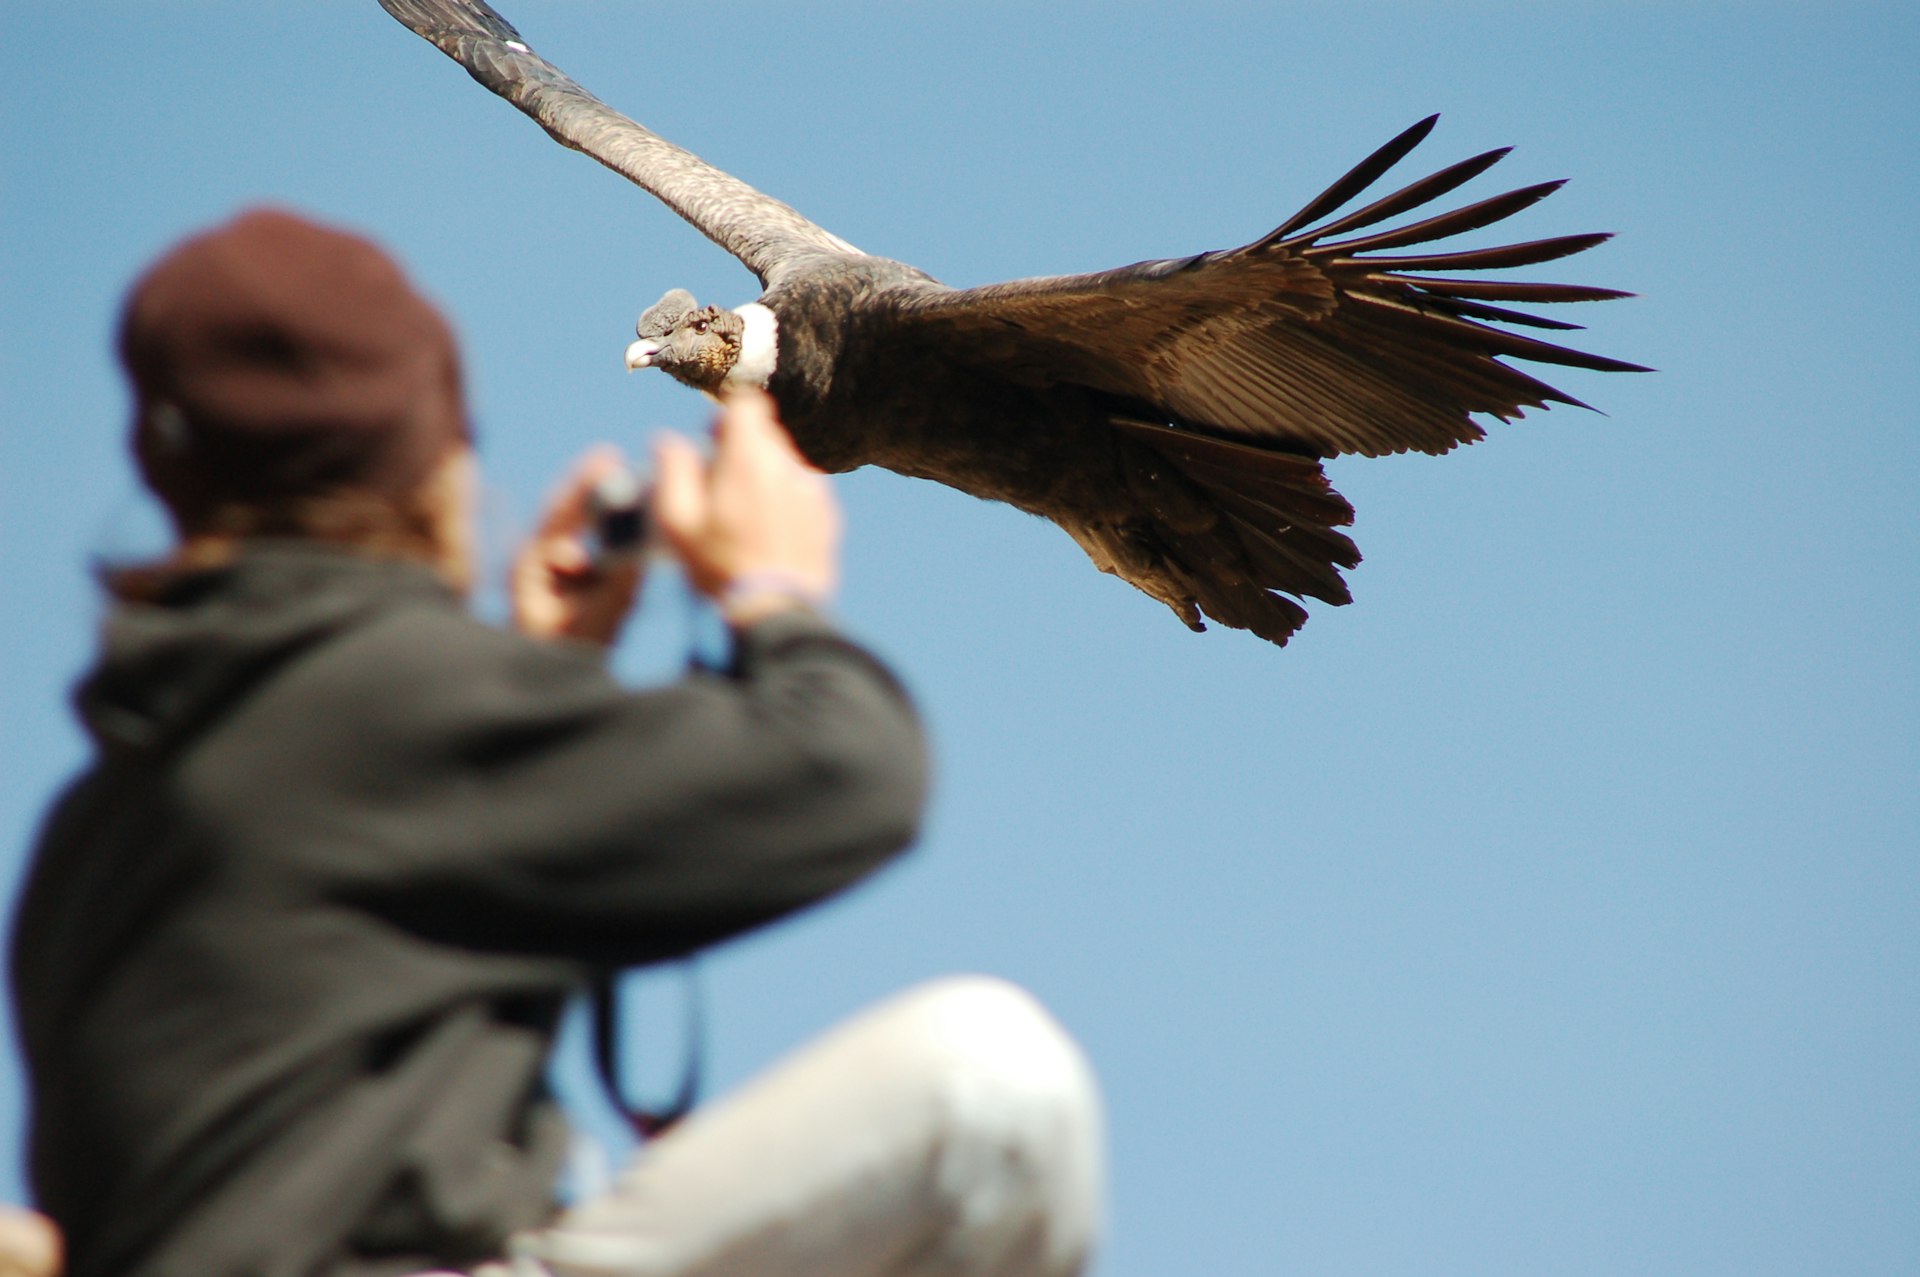 Out of focus photographer capturing a picture of a Condor in flight